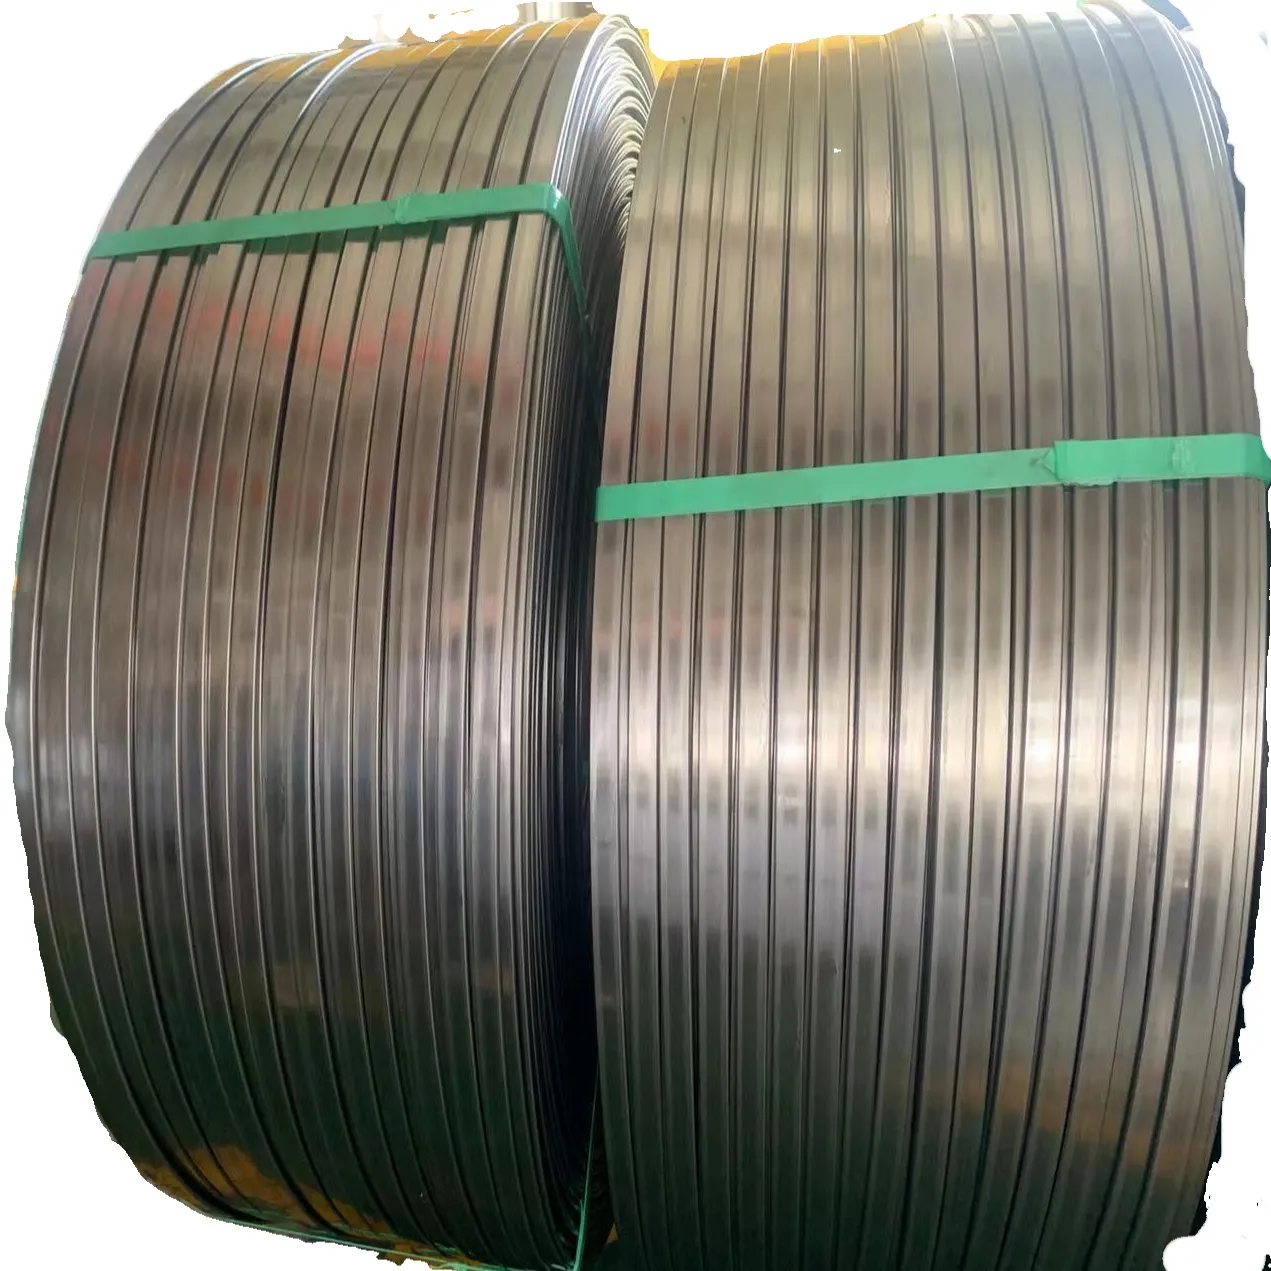 Cold Rolled Narrow Steel Strips